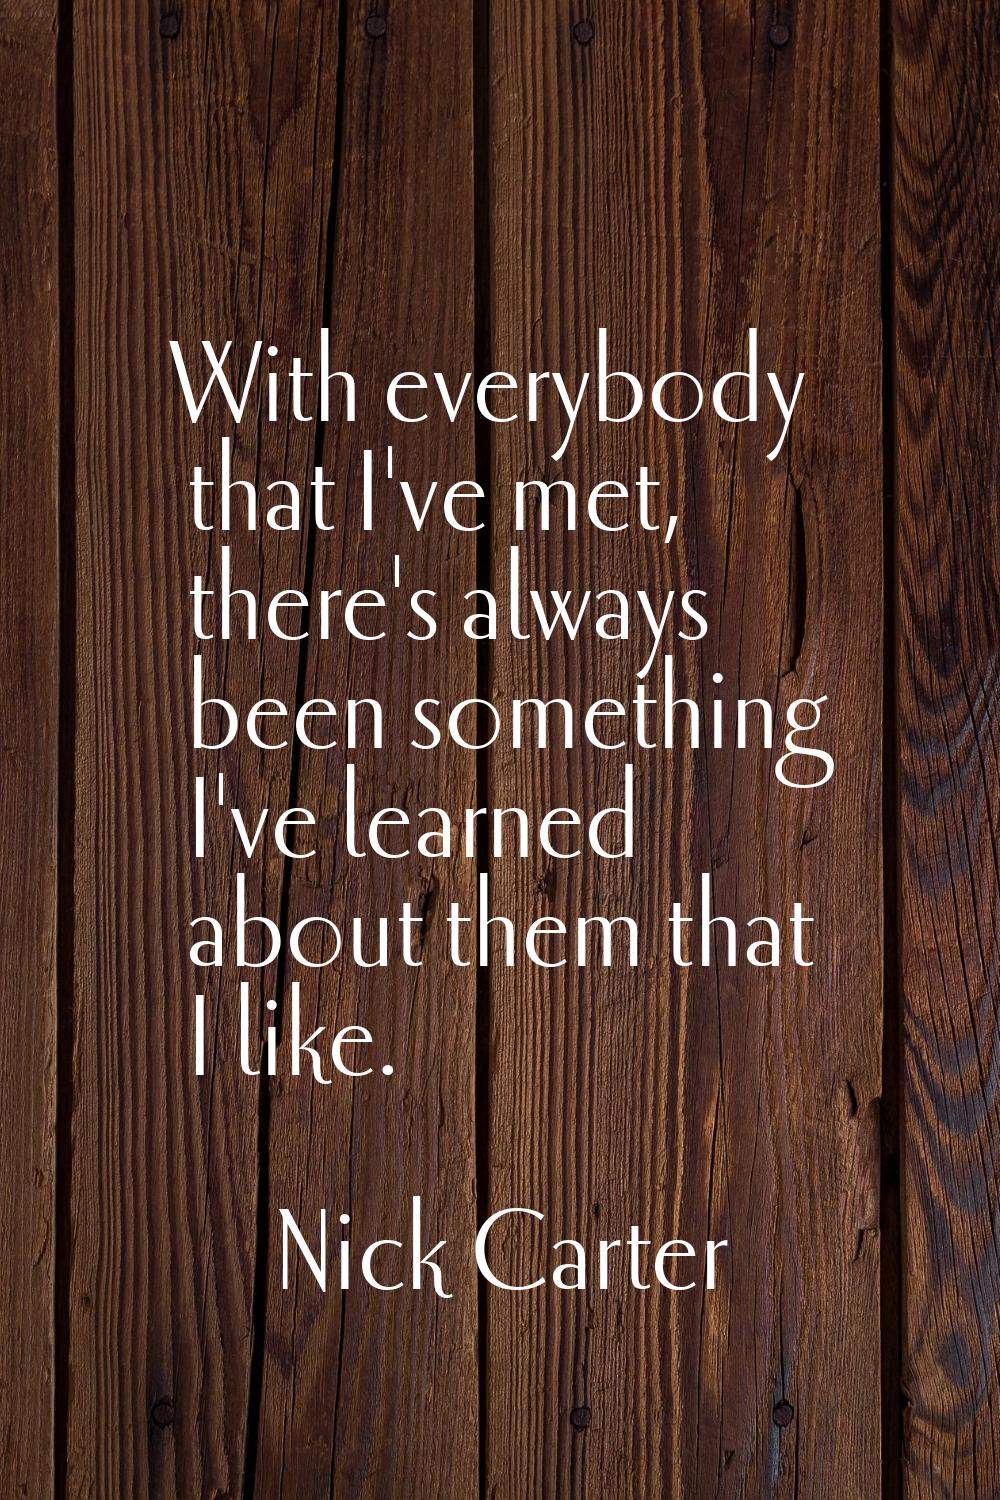 With everybody that I've met, there's always been something I've learned about them that I like.